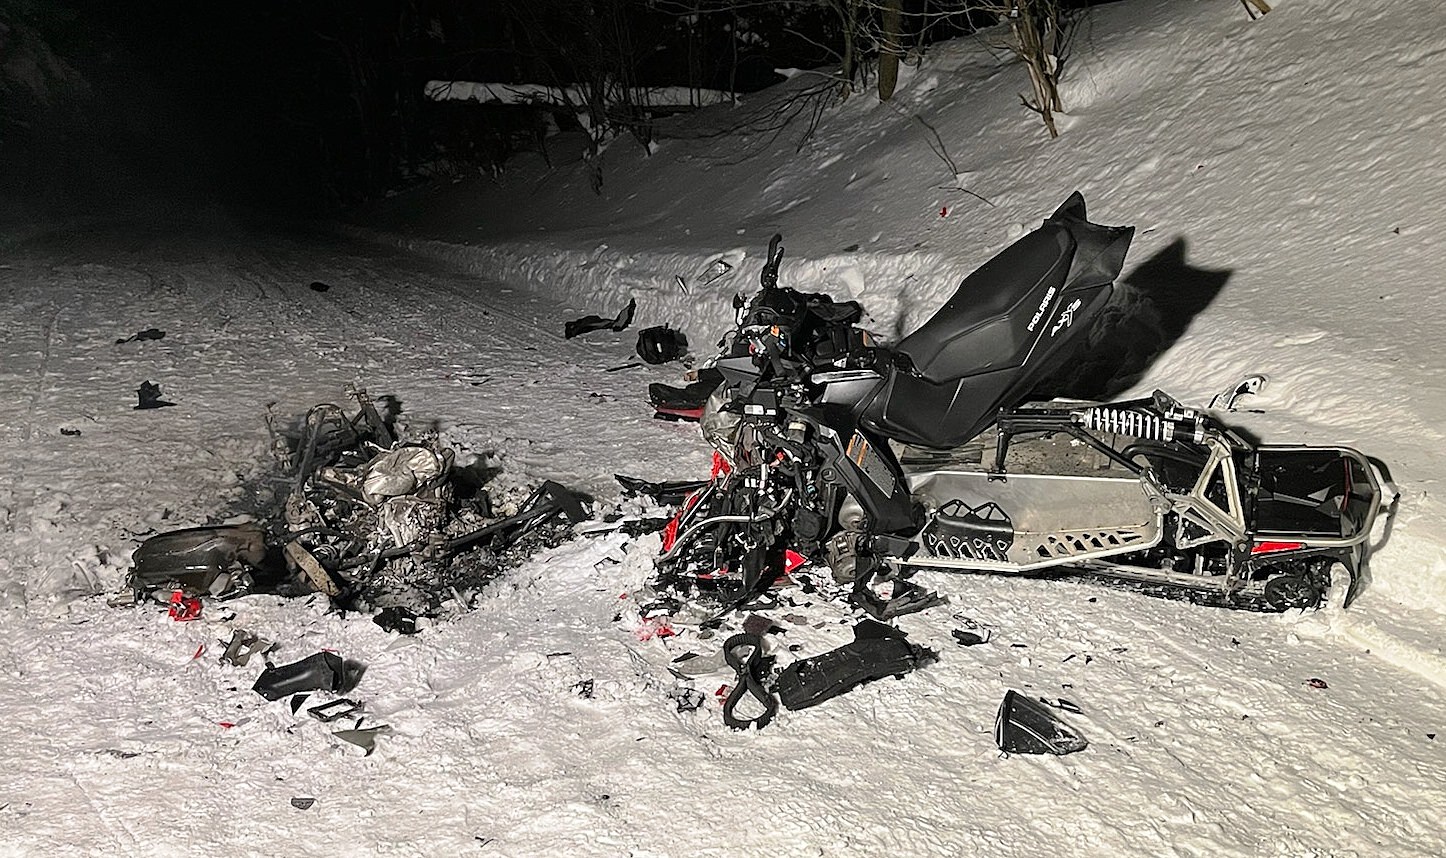 Snowmobiler Killed After Being Thrown From Sled in Adirondacks